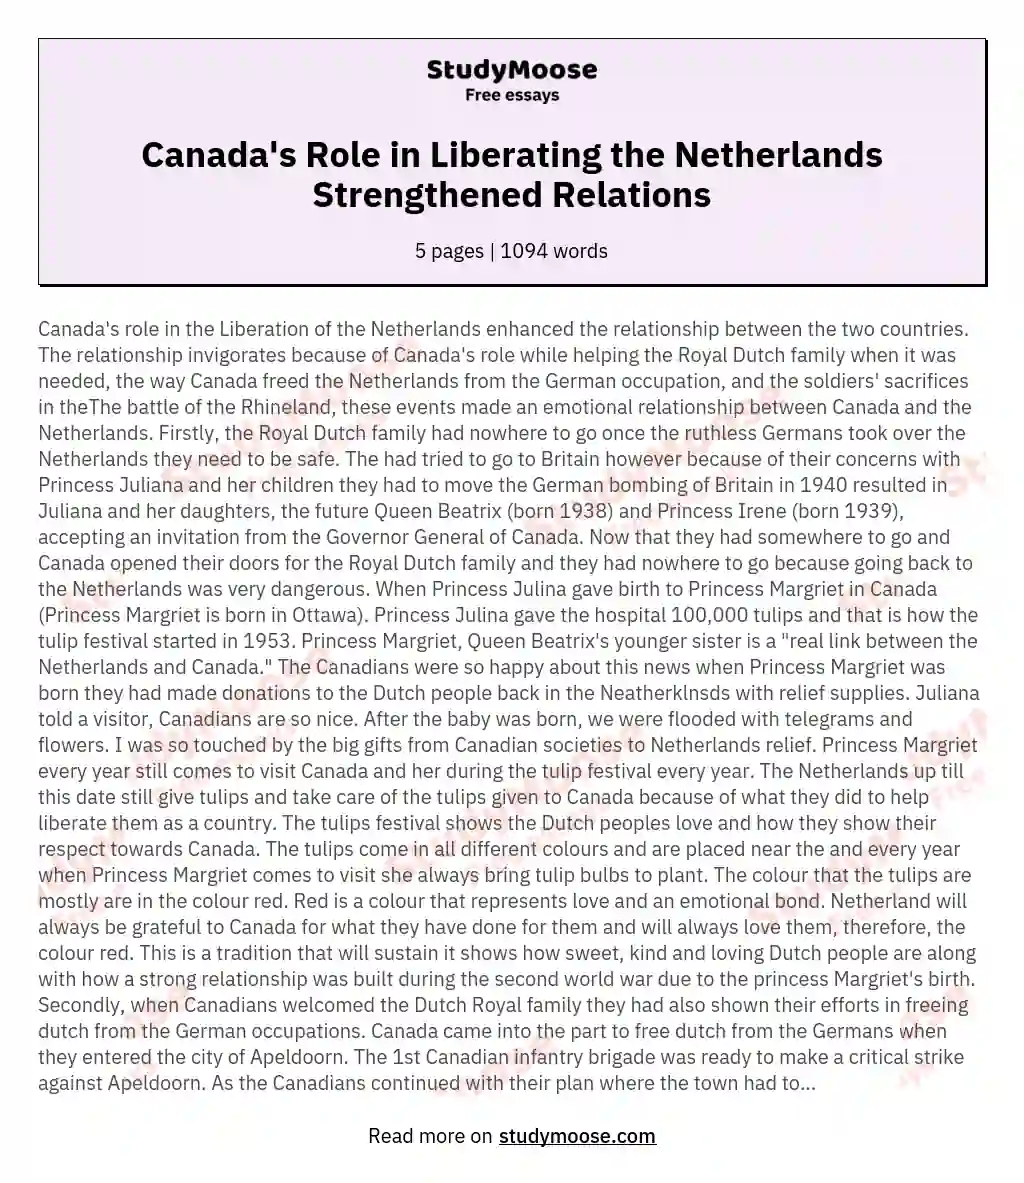 Canada's Role in Liberating the Netherlands Strengthened Relations essay